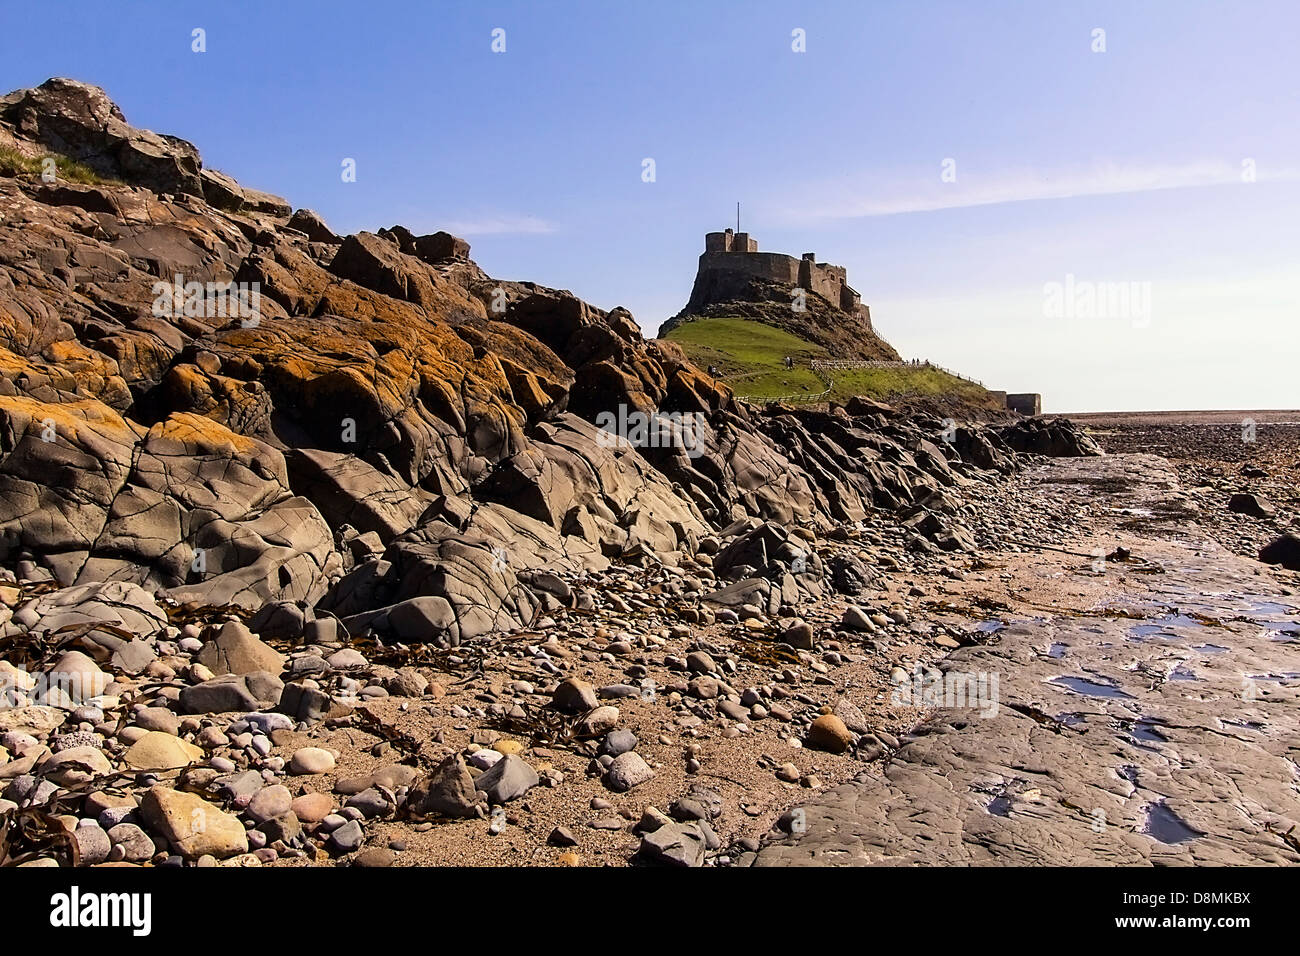 An image of lindisfarne castle. Stock Photo